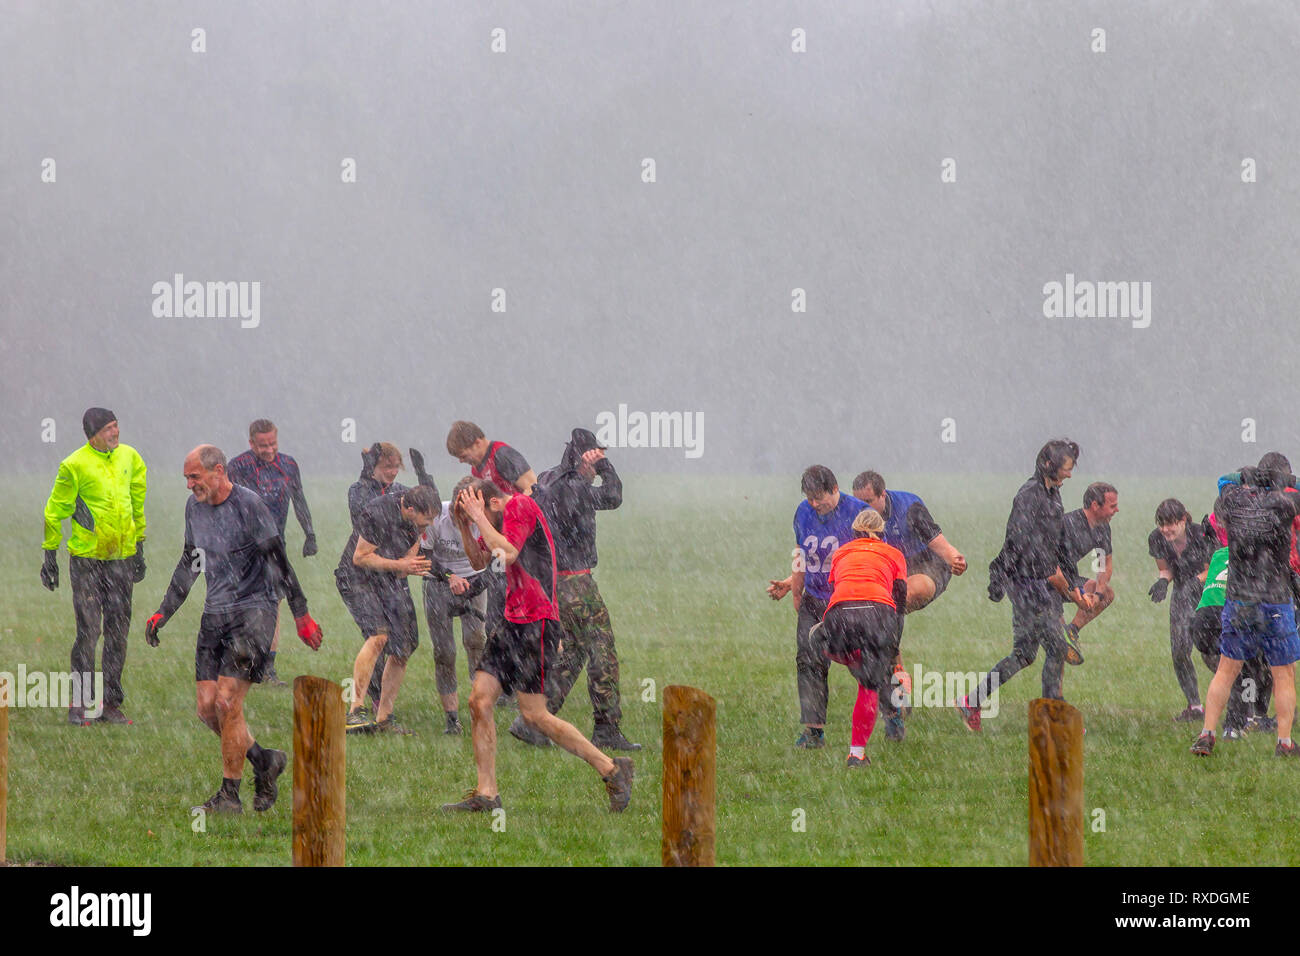 Northampton, UK. 9th March 2019. After a sunny start to the day, heavy rain came in midmorning soaking the people doing their keep fit classes in Abington Park. Credit: Keith J Smith./Alamy Live News Stock Photo